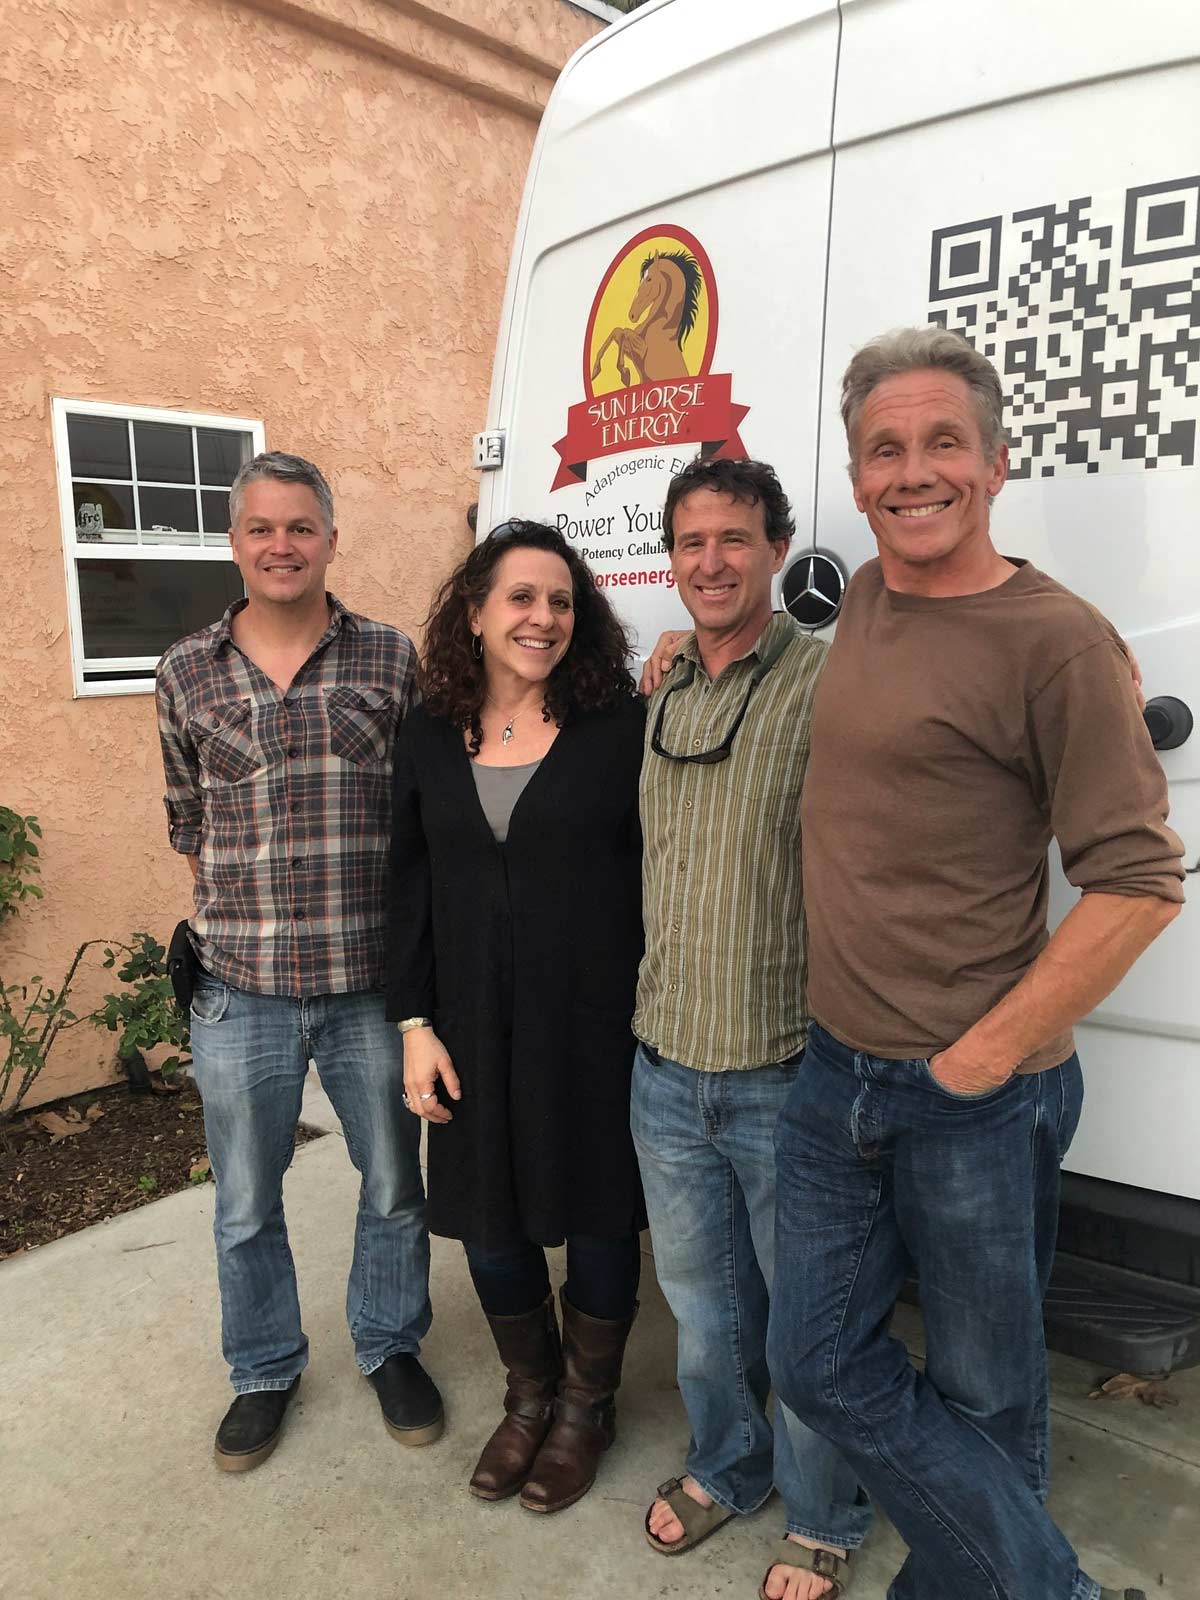 CBD Garage’s Catherine Greener and Alan Greenberg standing together outside with Justin Marvonek and Dan Moriaty from Sun Horse Energy.